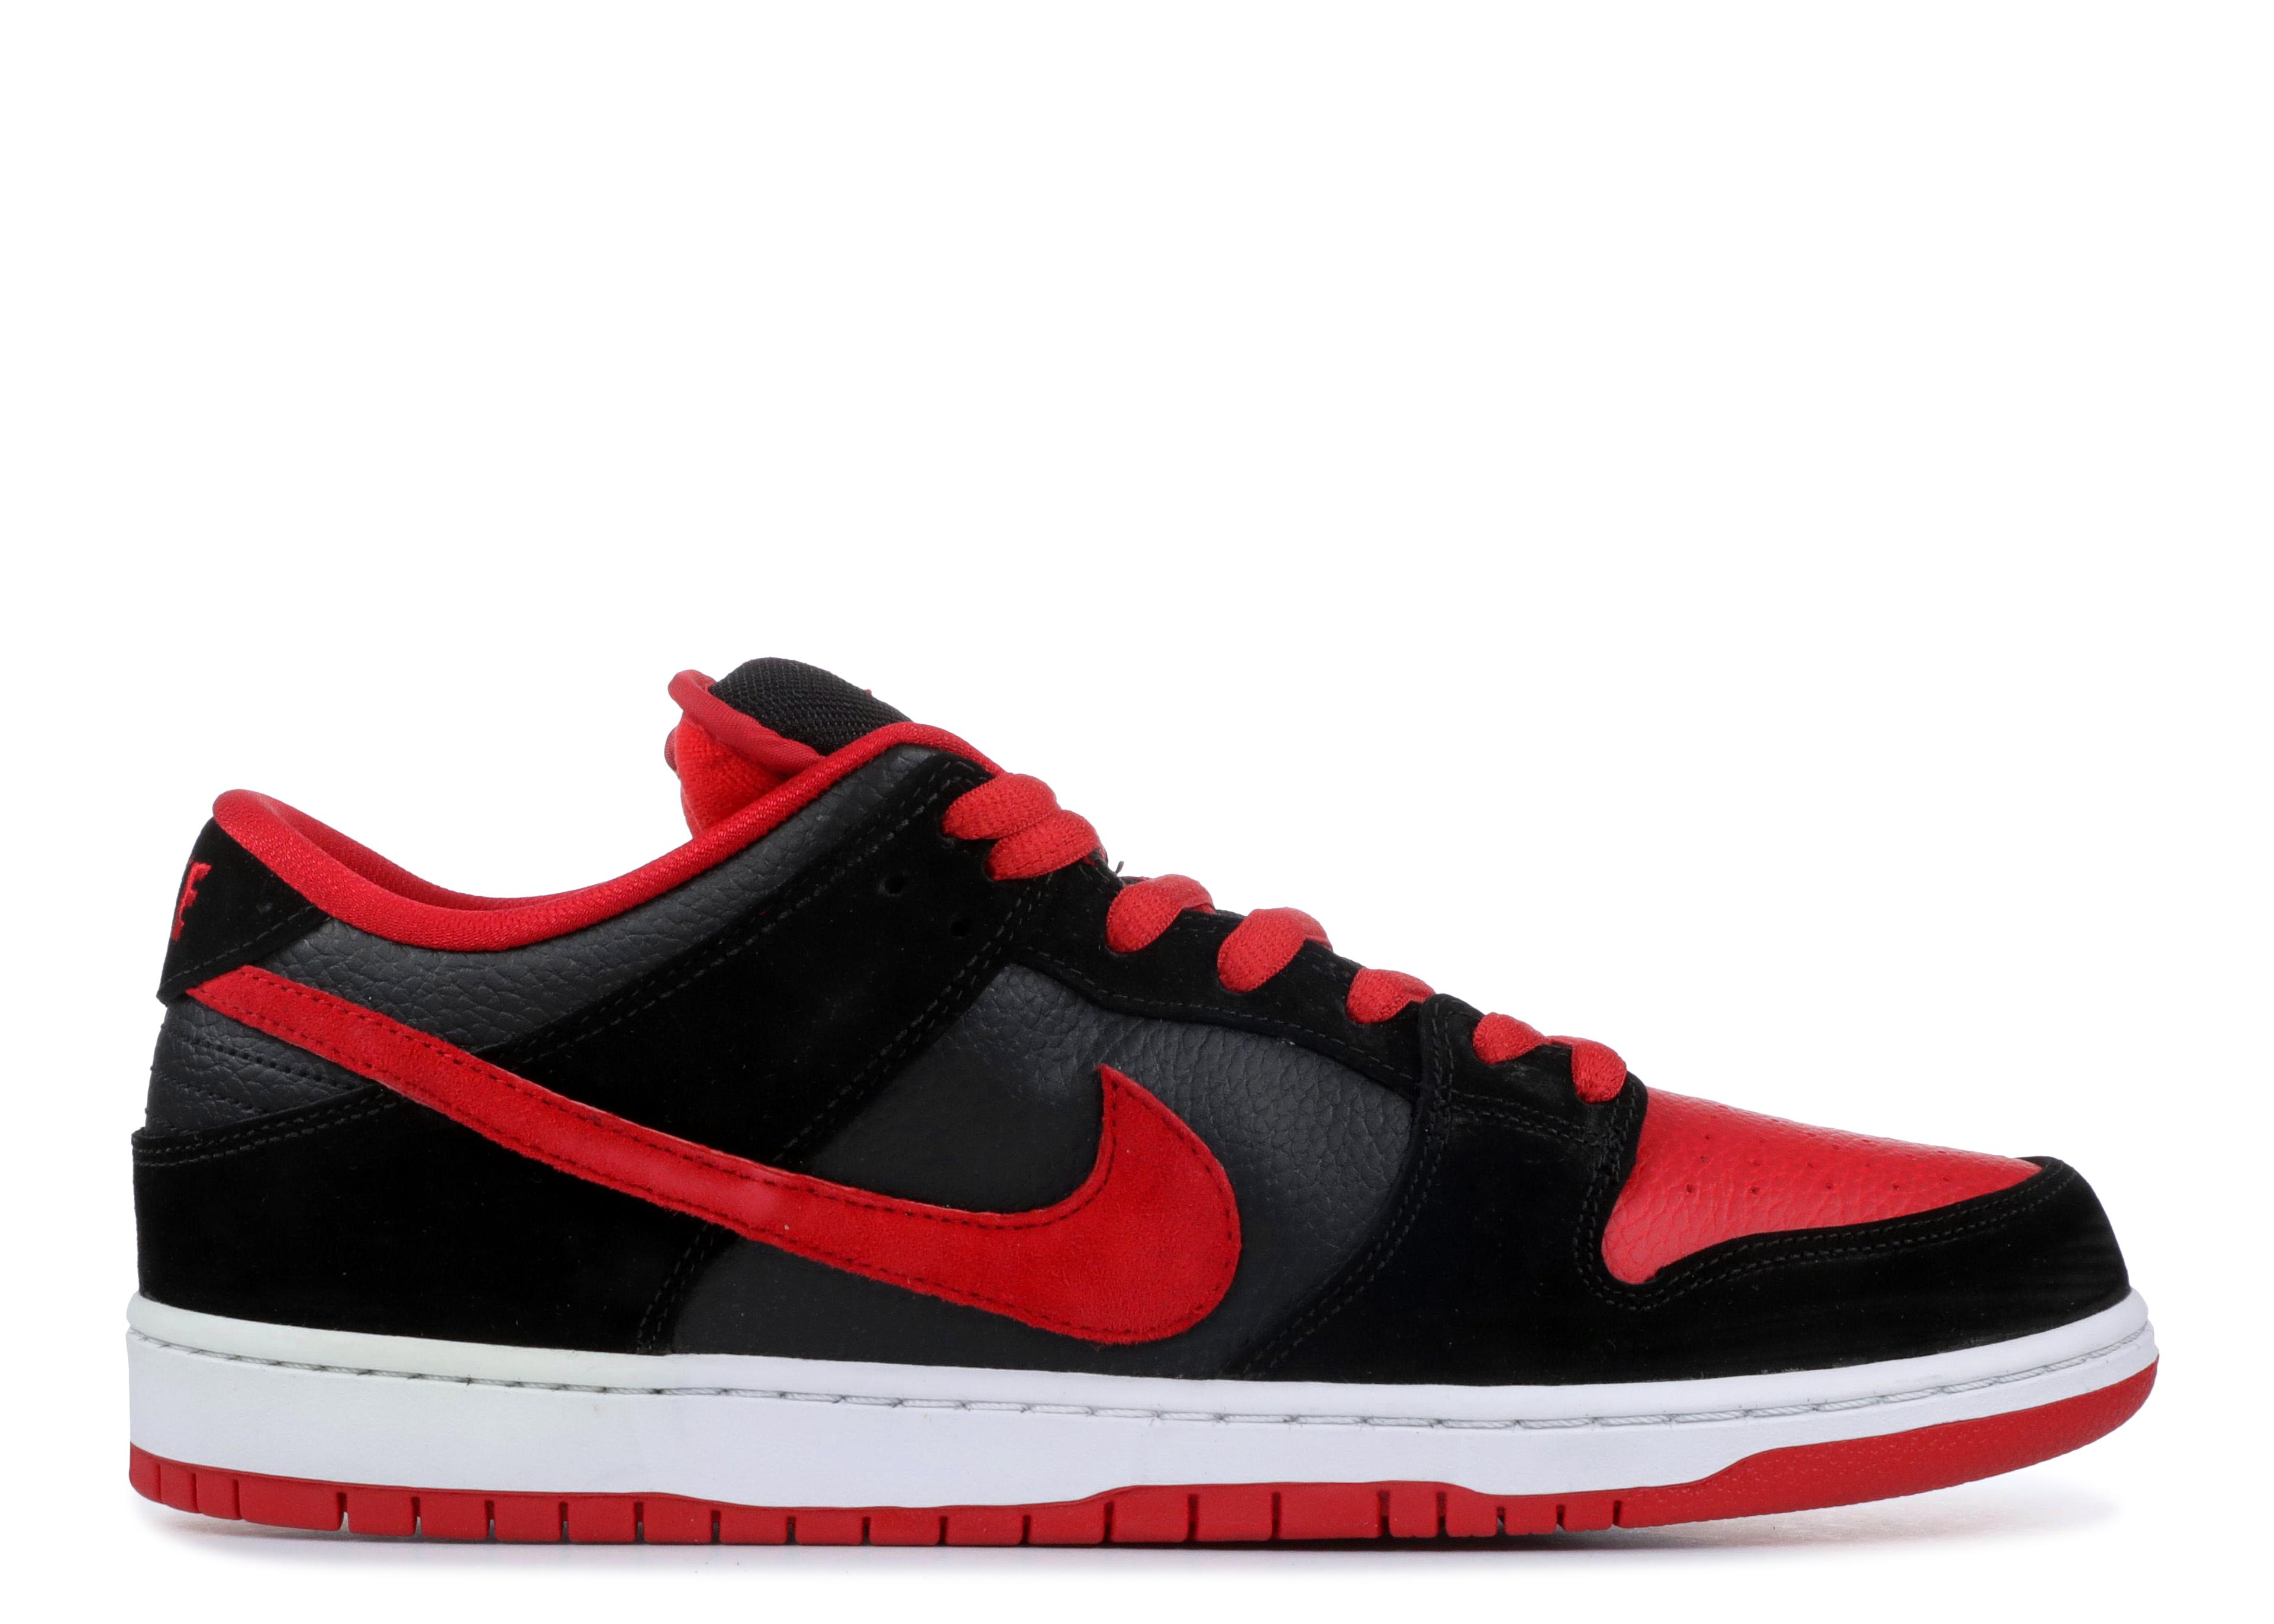 Nike Suede Dunk Low Pro Sb 'jpack' Shoes - Size 13 in Black/Red (Black